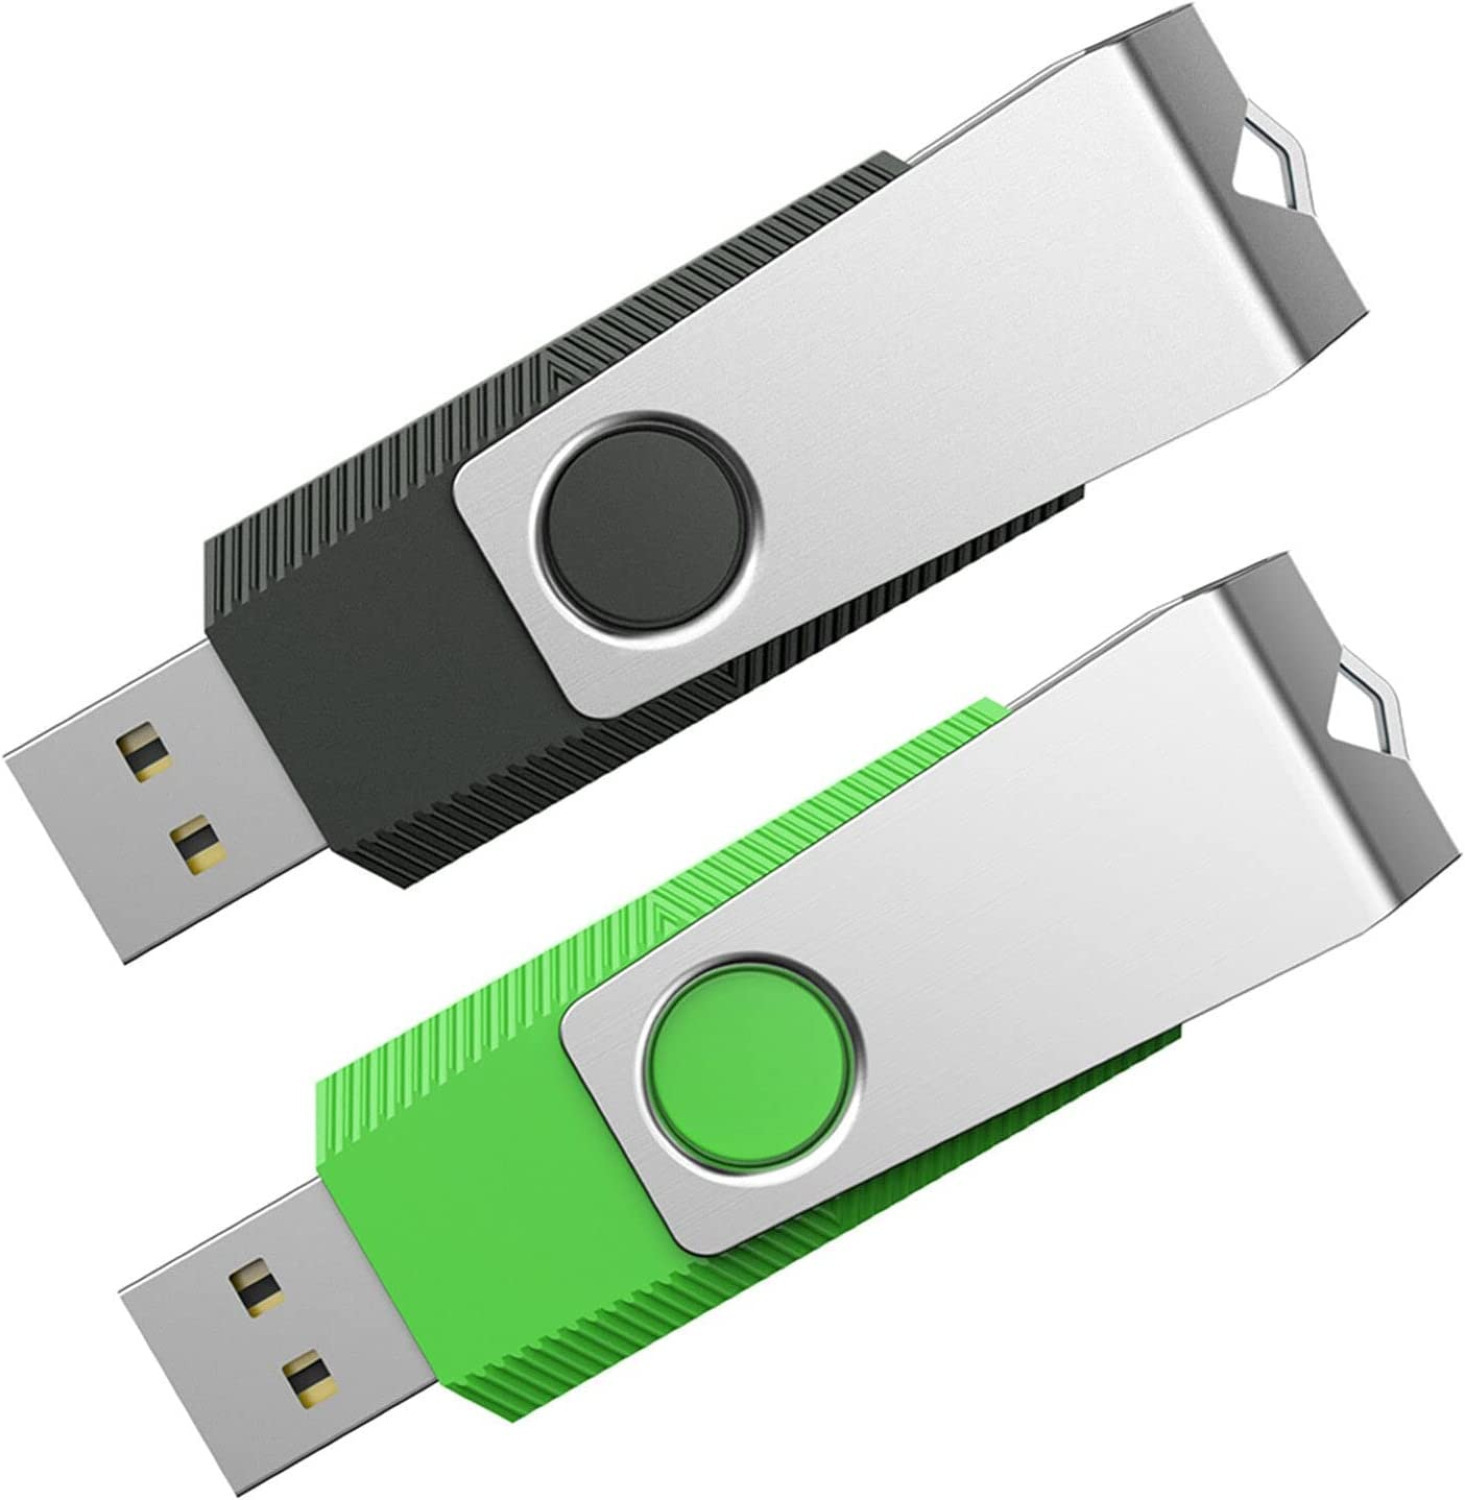 Prime Exclusive: 2-Pack 64GB Aiibe USB 2.0 Flash Drive w/ Keychain $7.64 + Free Shipping